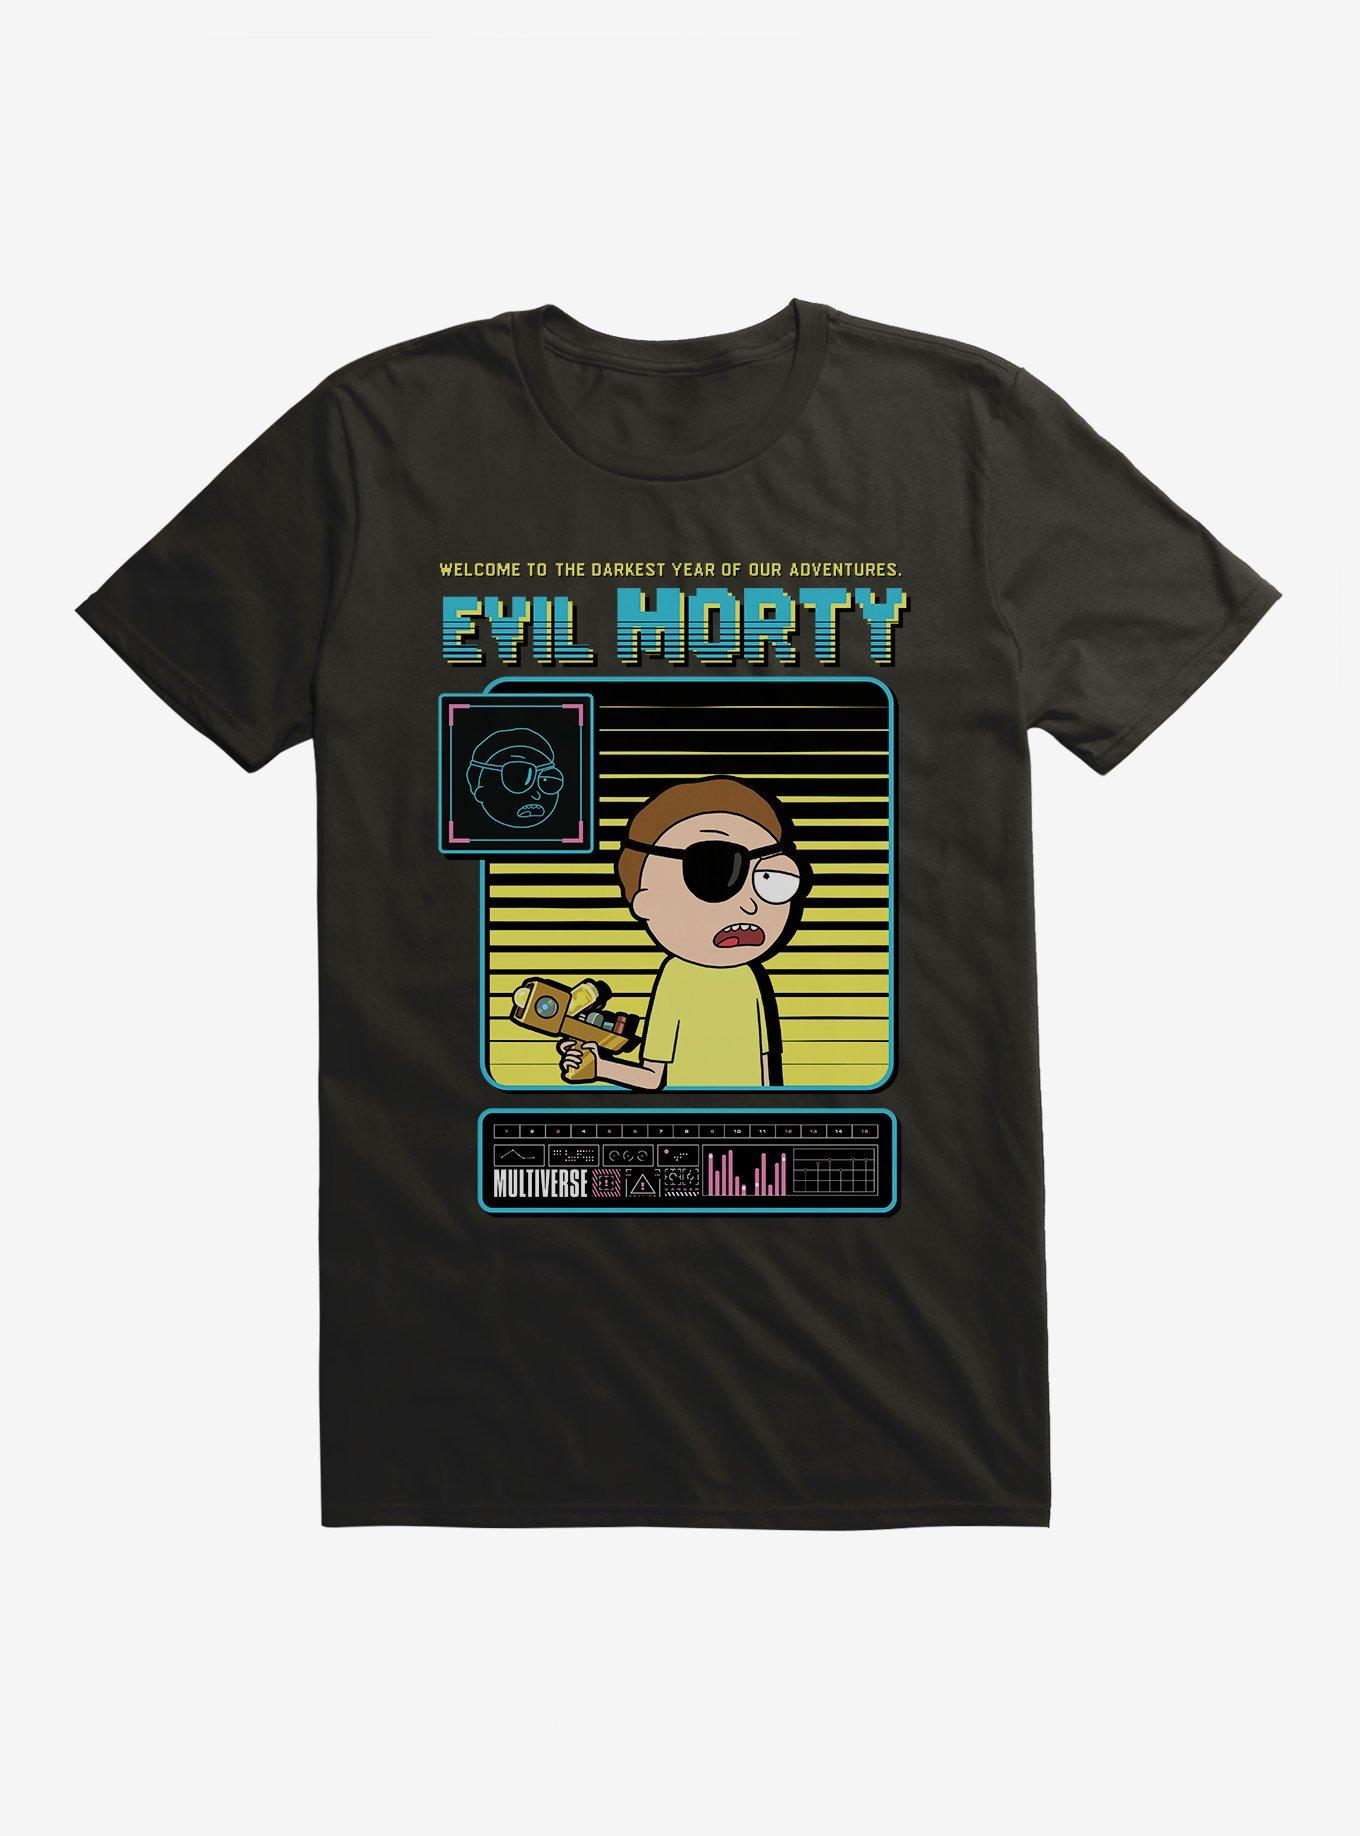 Rick And Morty Evil T-Shirt